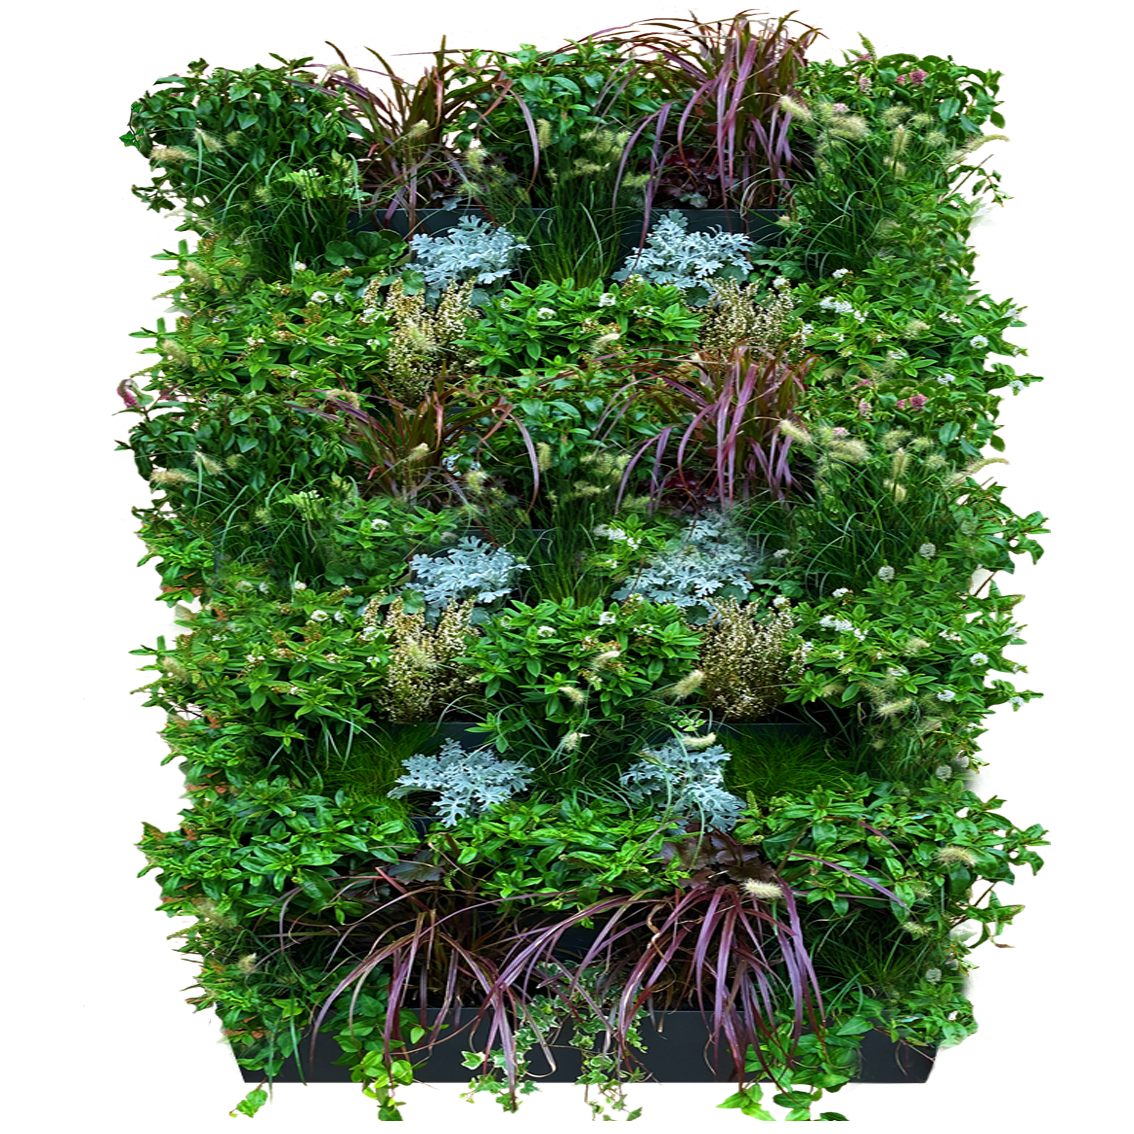 GreenWalls vertical living plant wall W100 X H120cm self build battery powered system 1 x W100cm column x 6 tray high without sidewalls